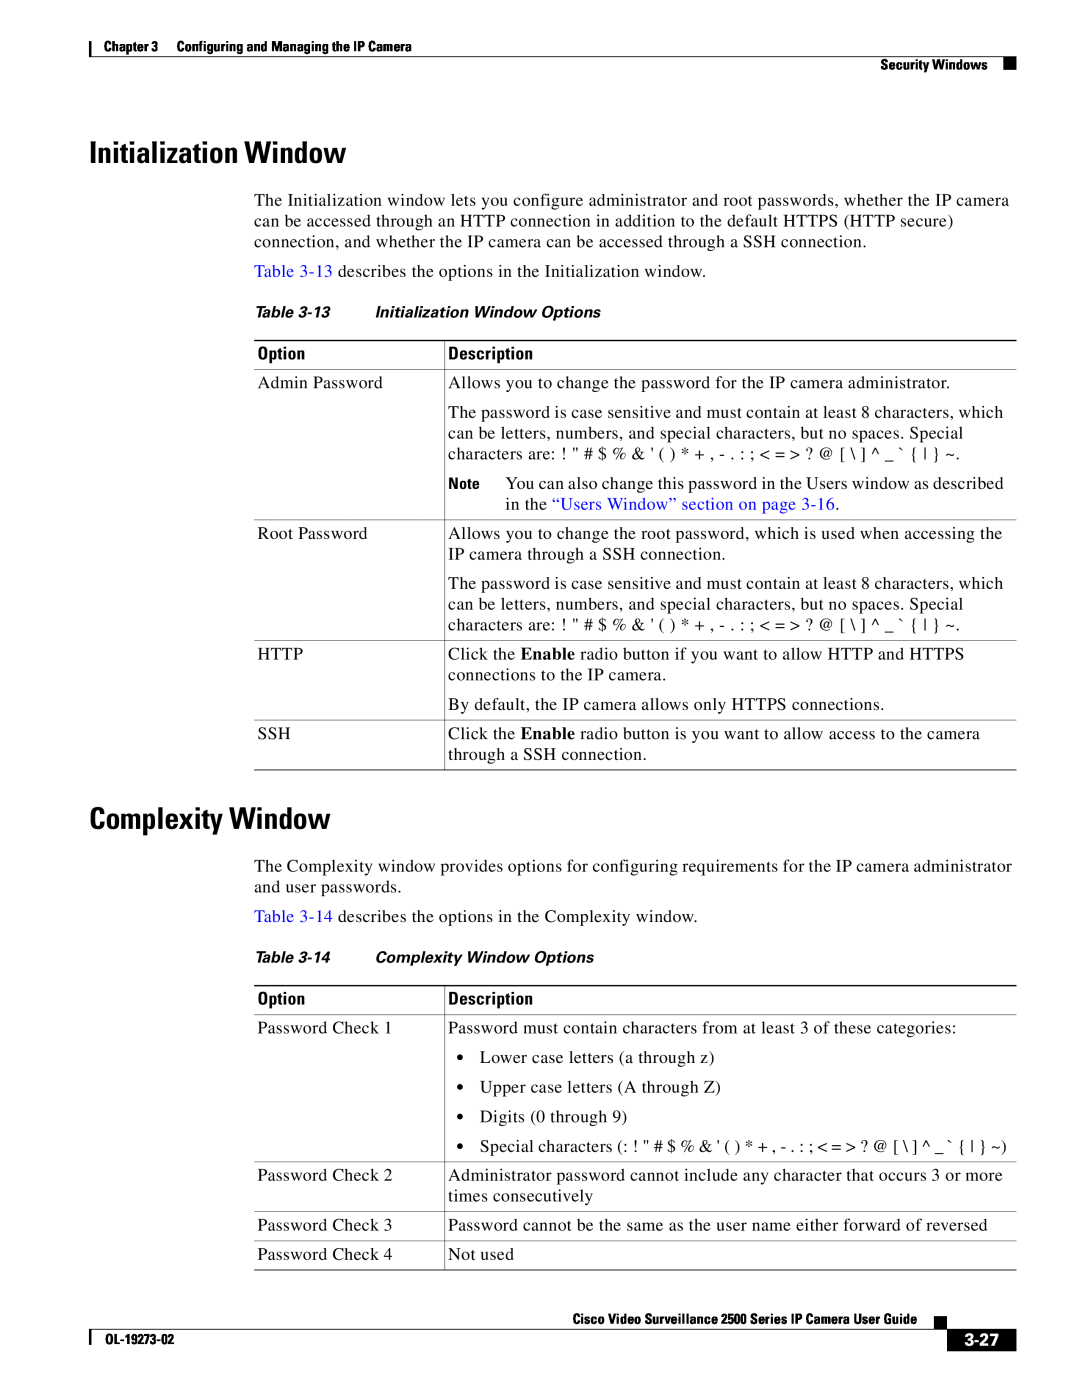 Cisco Systems CIVS-IPC-2500 Initialization Window, Complexity Window, in the “Users Window” section on page, 3-27, Option 